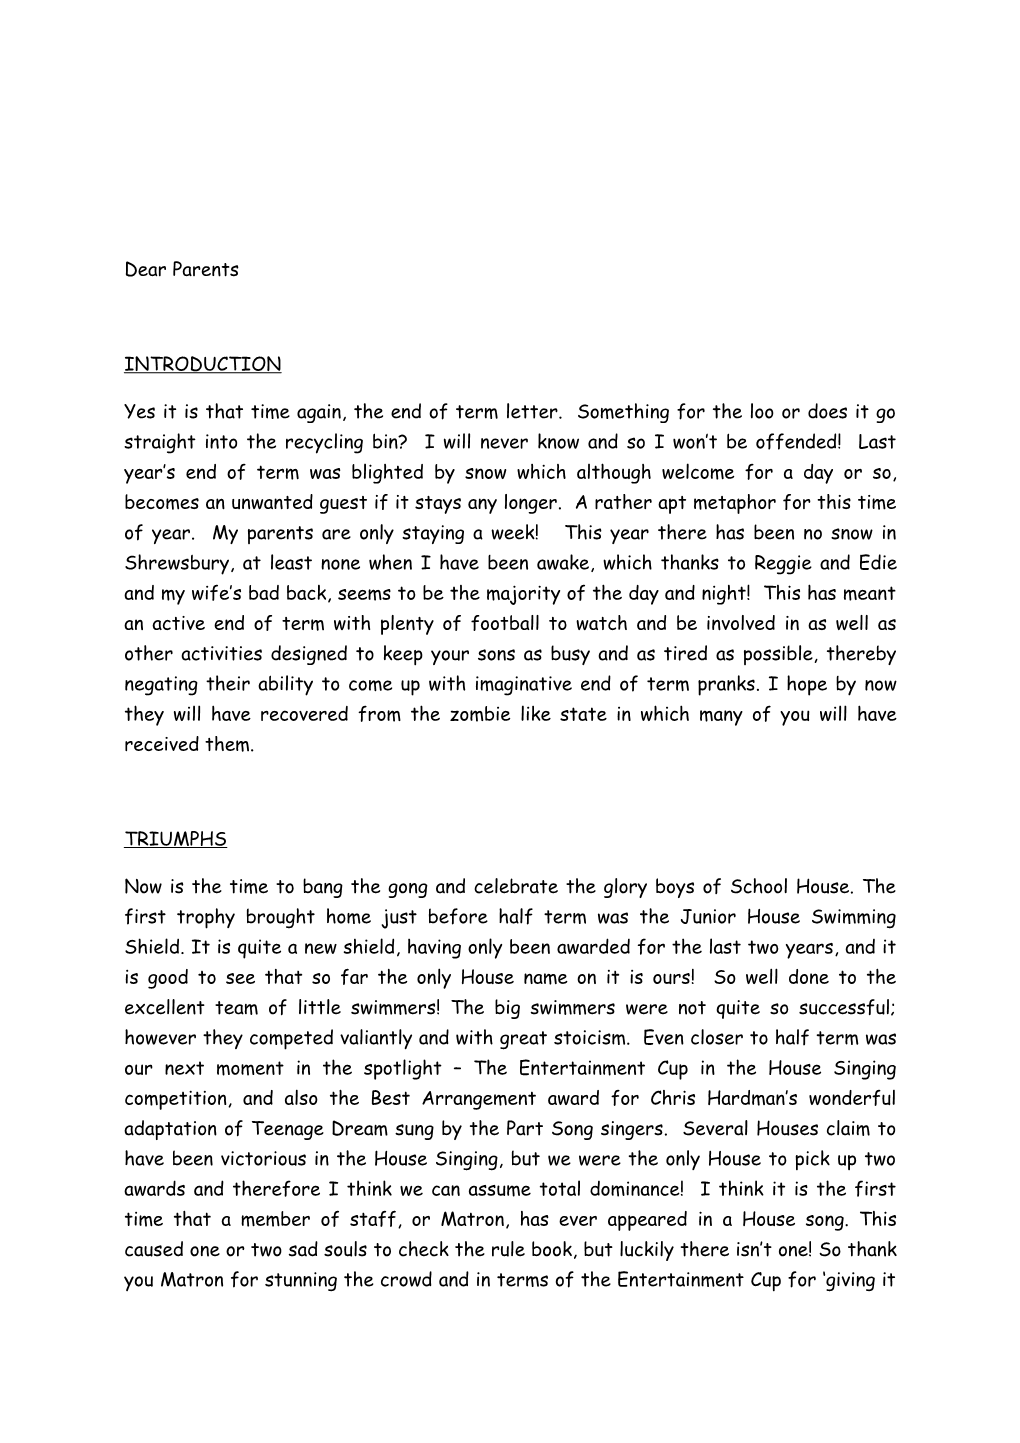 Yes It Is That Time Again, the End of Term Letter. Something for the Loo Or Does It Go